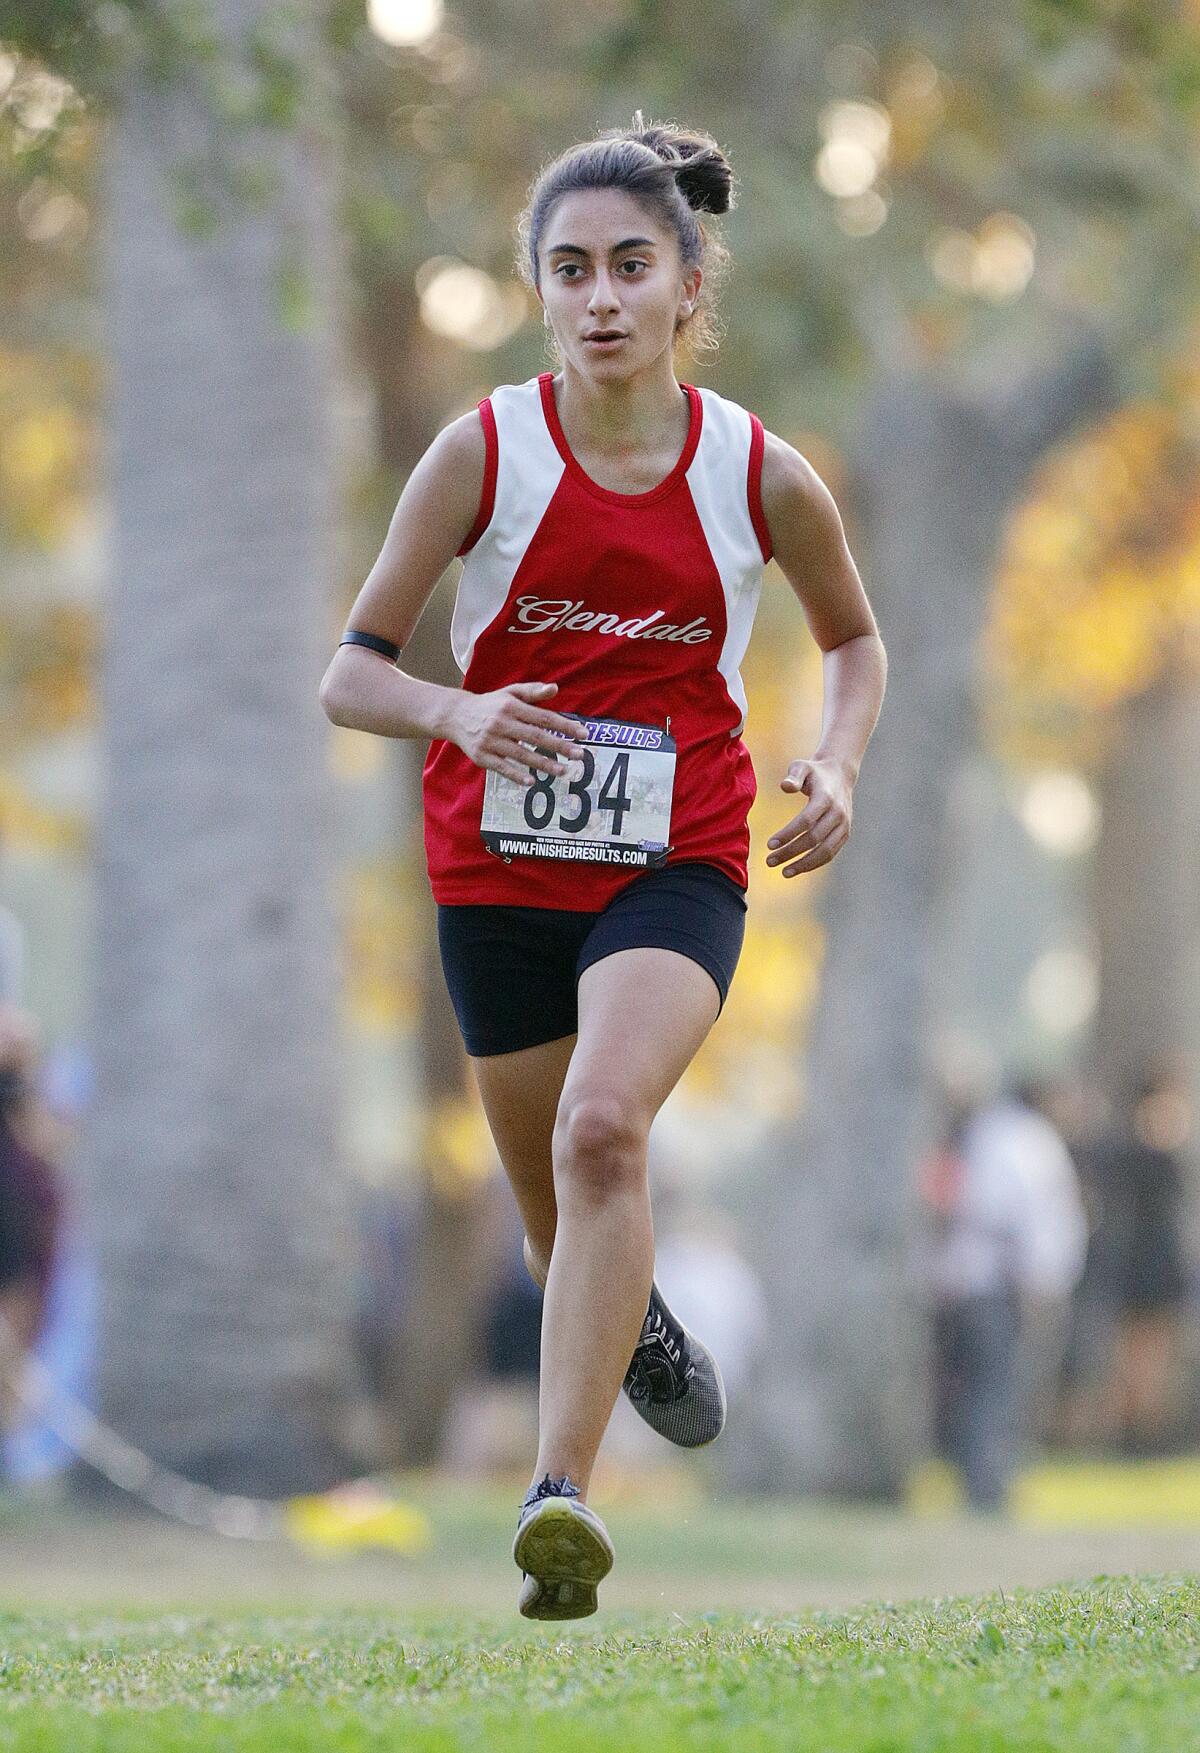 Glendale's Lilit Arakelyan comes to the finish in thirty-third place in a Pacific League cross country meet at Arcadia Park in Arcadia on Thursday, November 7, 2019. This is the final league meet of the season.